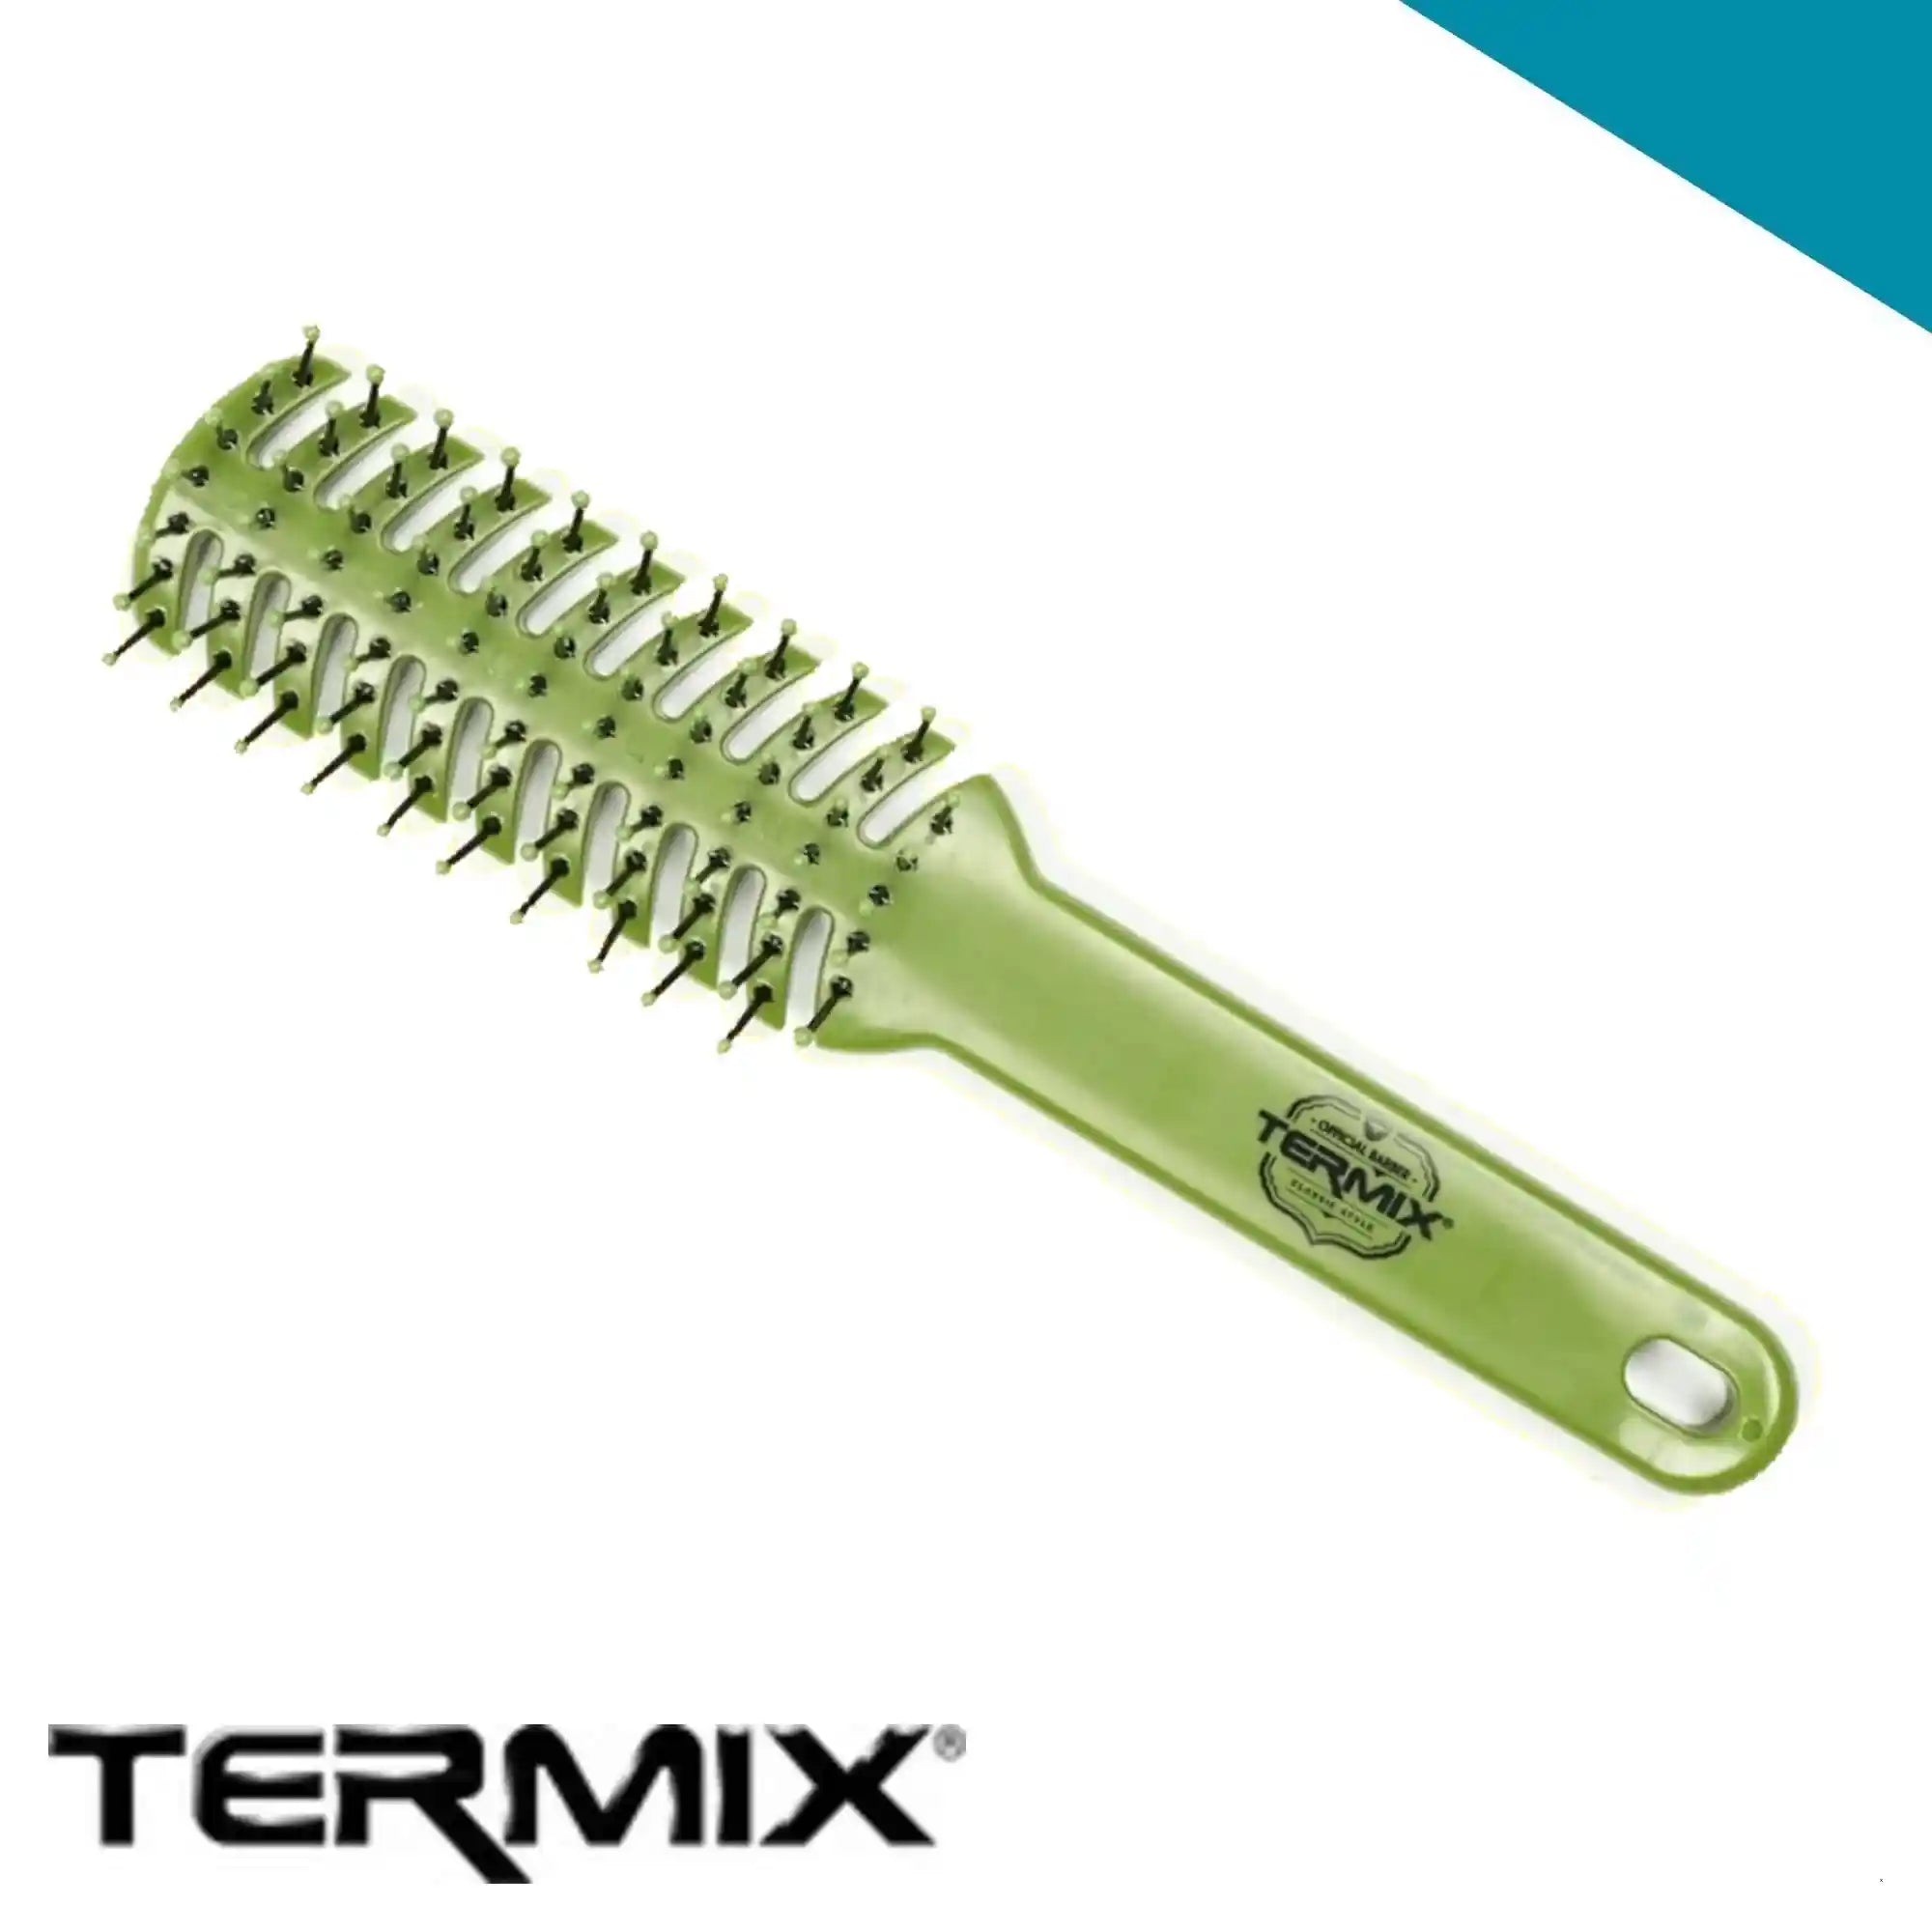 Termix Barber Hairbrush large vents Green